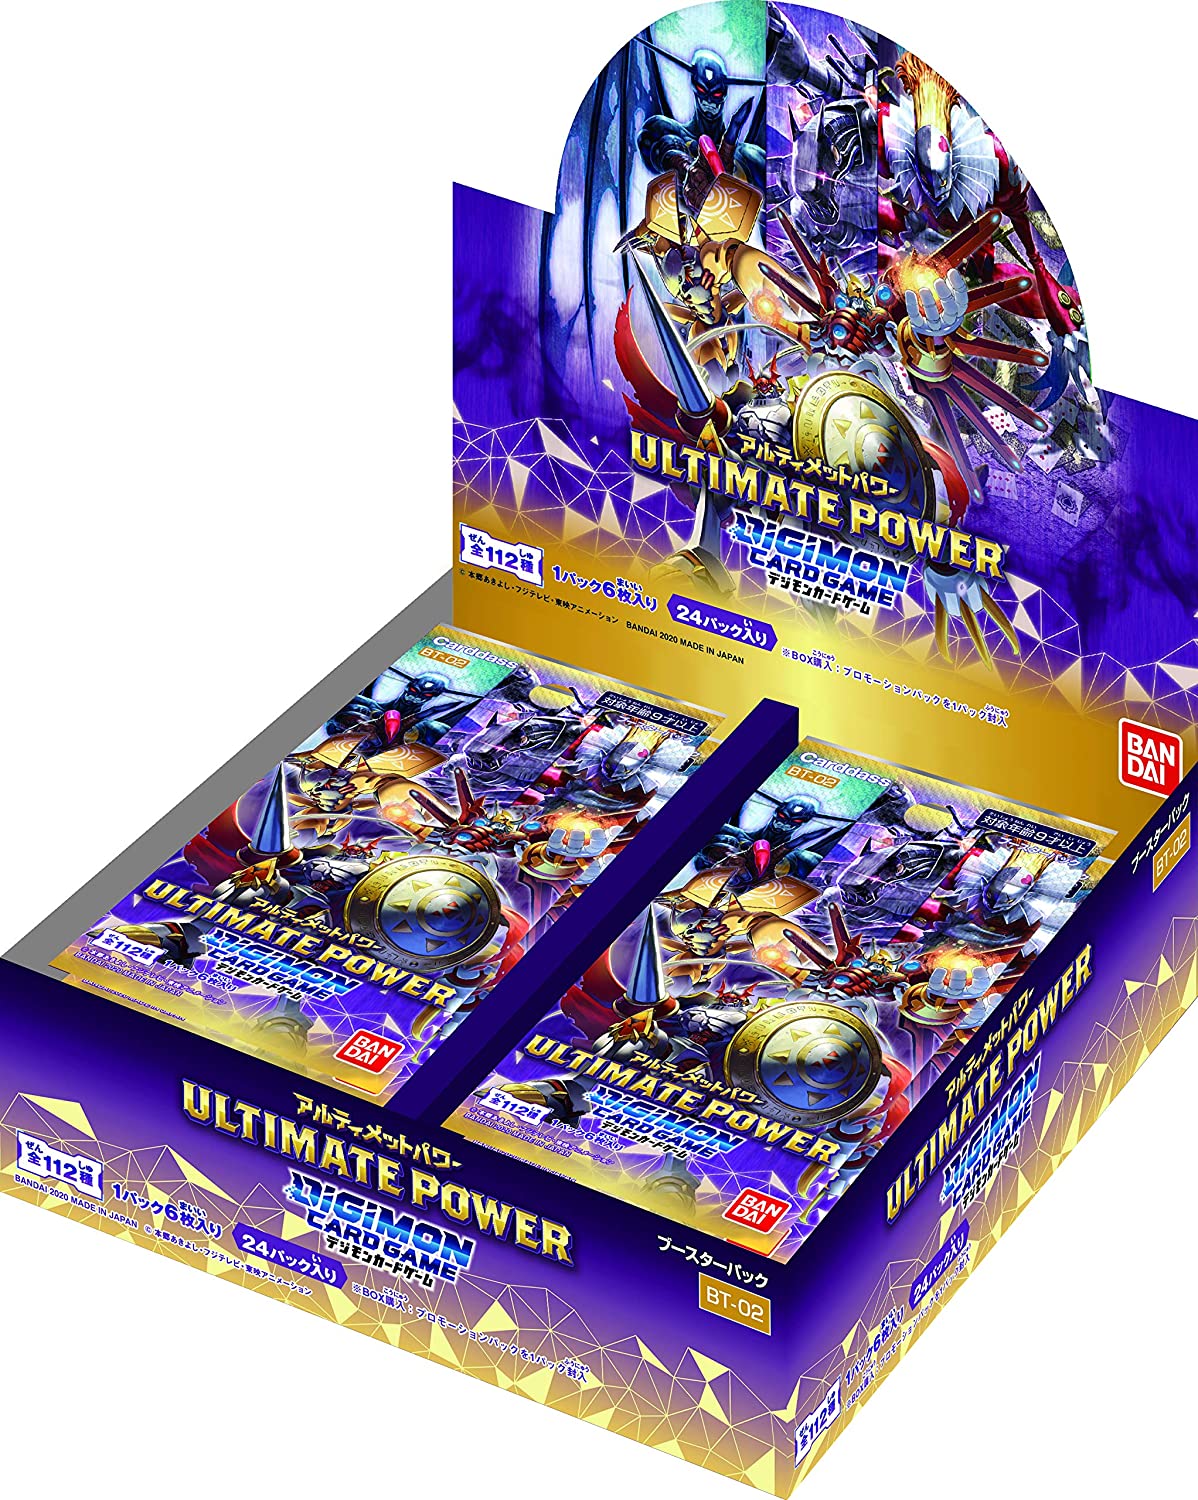 DIGIMON CARD GAME ULTIMATE POWER [BT-02] Box